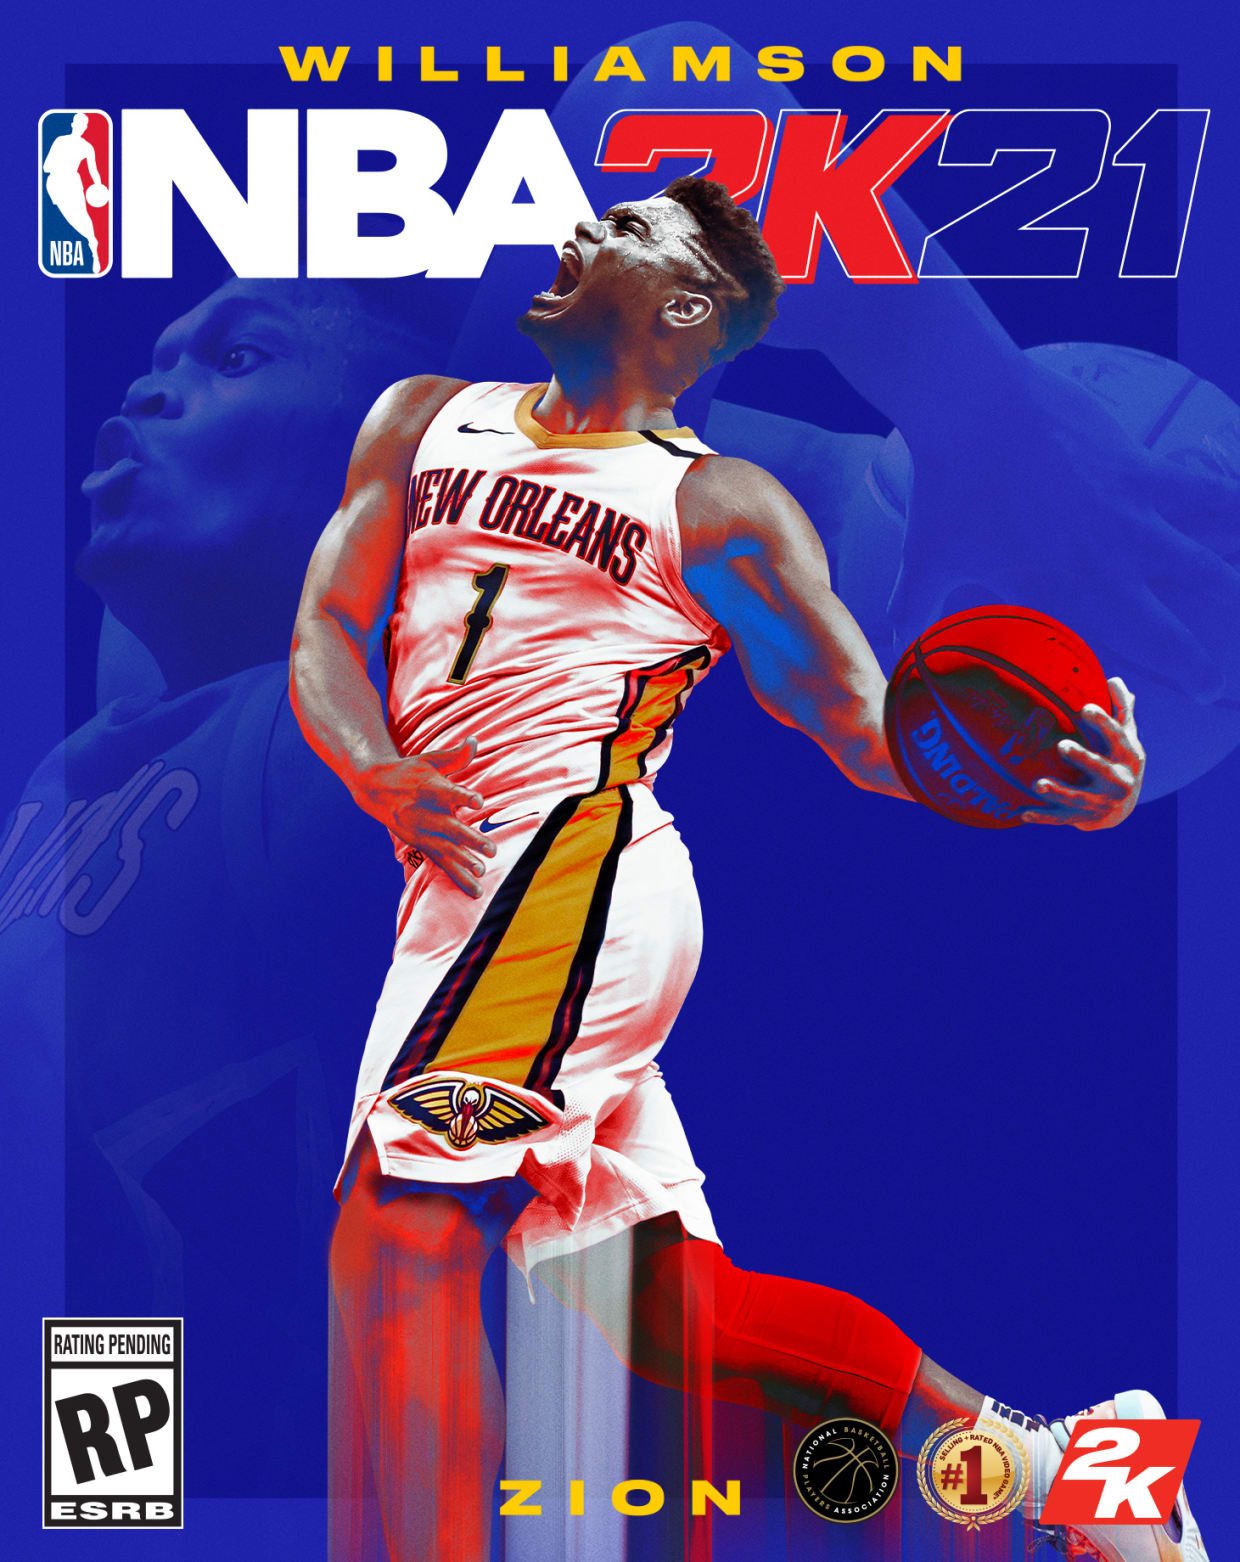 Zion Williamson is the NBA 2K21 Cover Athlete For Next Gen Systems, Who  Gets The Third Cover? - Operation Sports